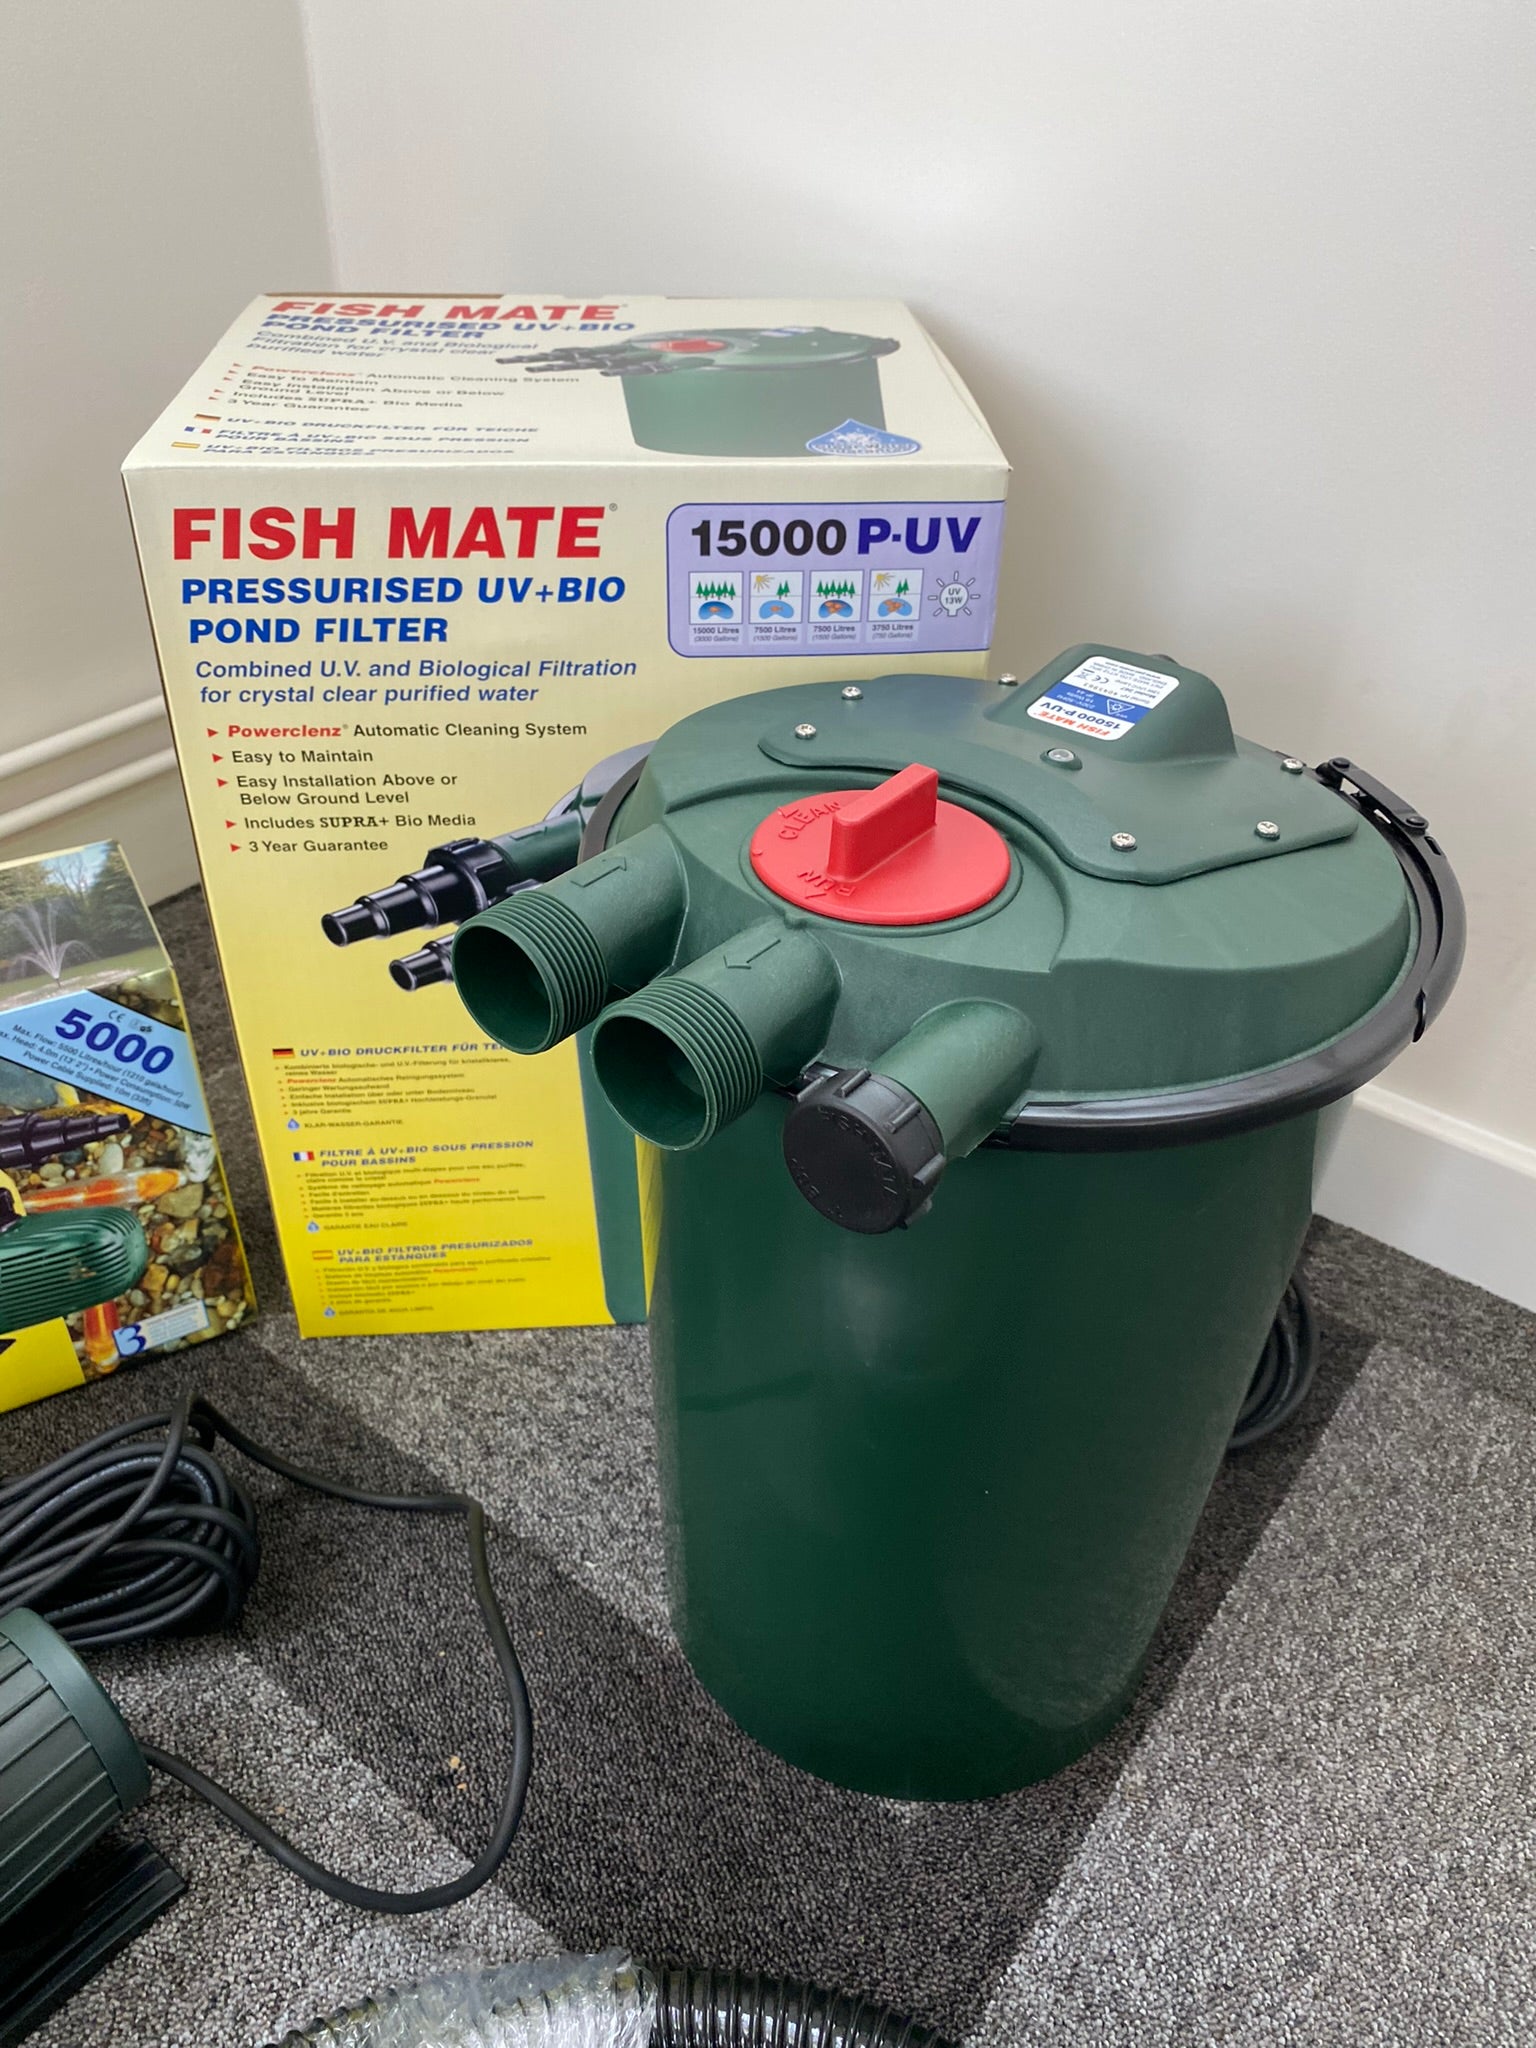 Fish Mate Pump + Filter Bundle Kit for Pond / Water Features 4,000 to 15,000 litres (750 to 3,000 gallons)